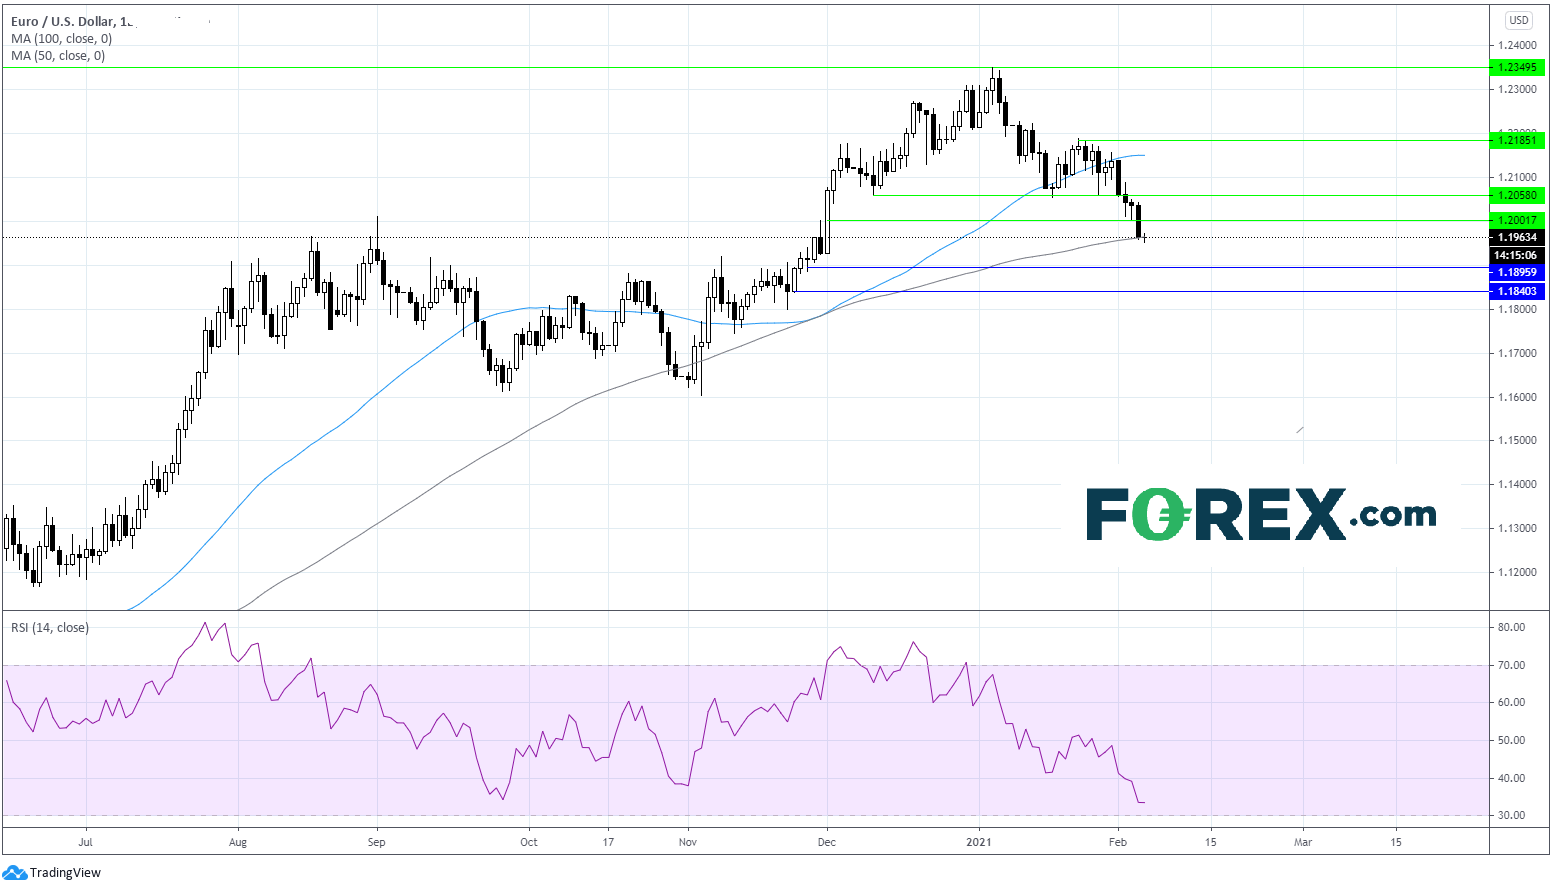 Chart analysis shows EUR vs USD. Published in May 2021 by FOREX.com